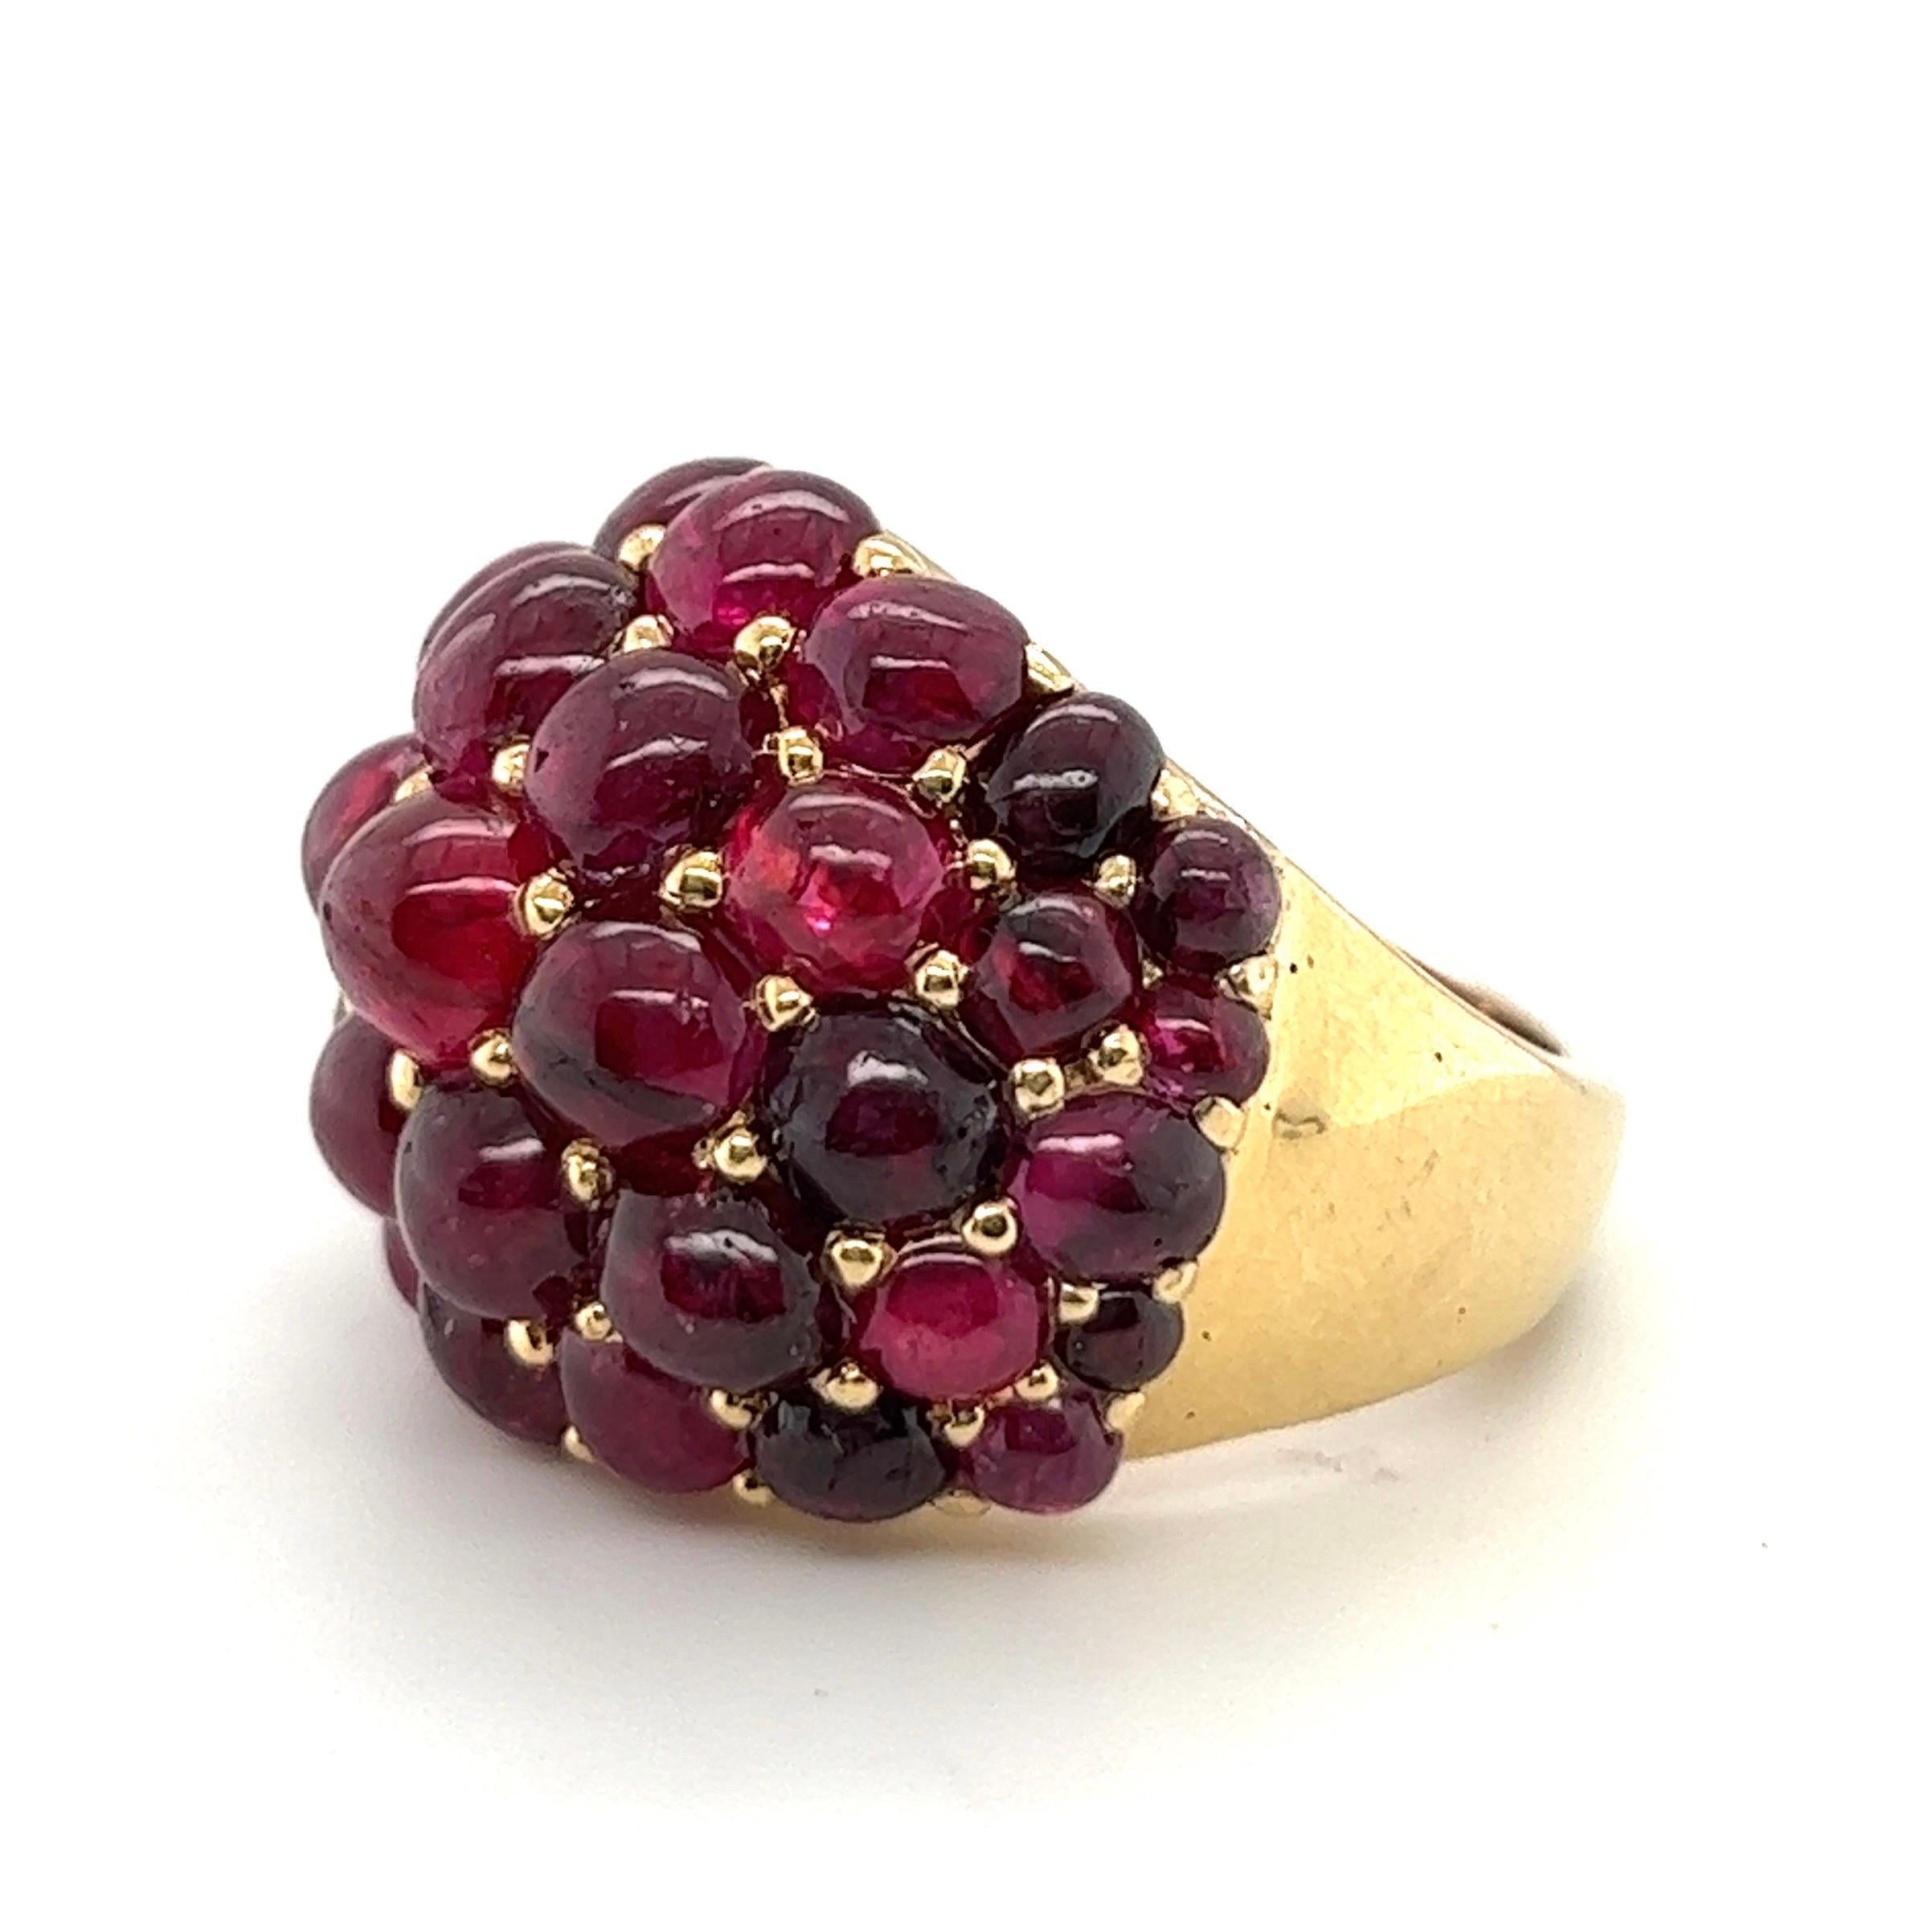 Ravishing 18 karat yellow gold and ruby cocktail ring.
Crafted in 18 karat yellow gold, the dome fully set with numerous round and oval ruby cabochons of slightly different sizes and red shades.
This statement ring is just perfect for day and